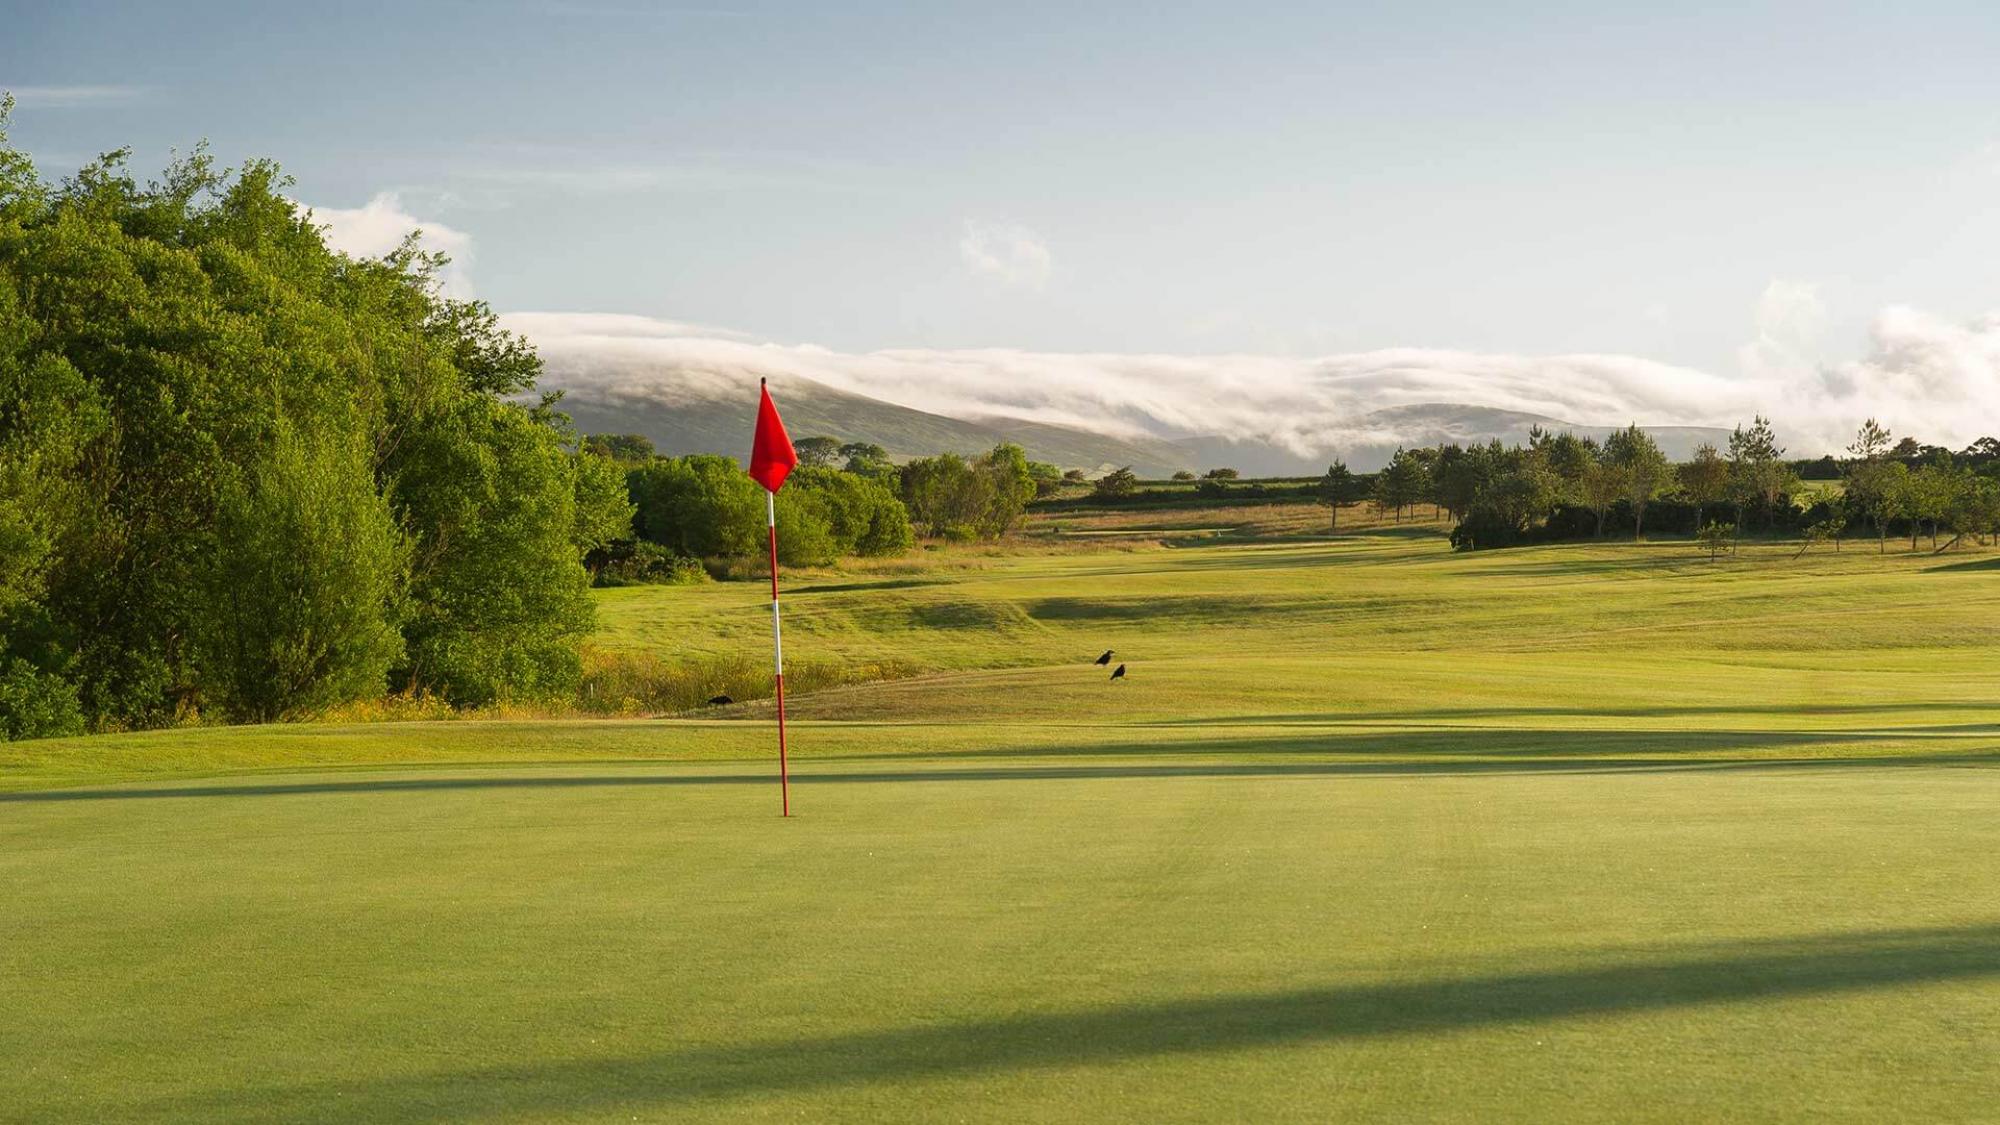 View Mount Murray Golf Club's lovely golf course in vibrant Isle of Man.